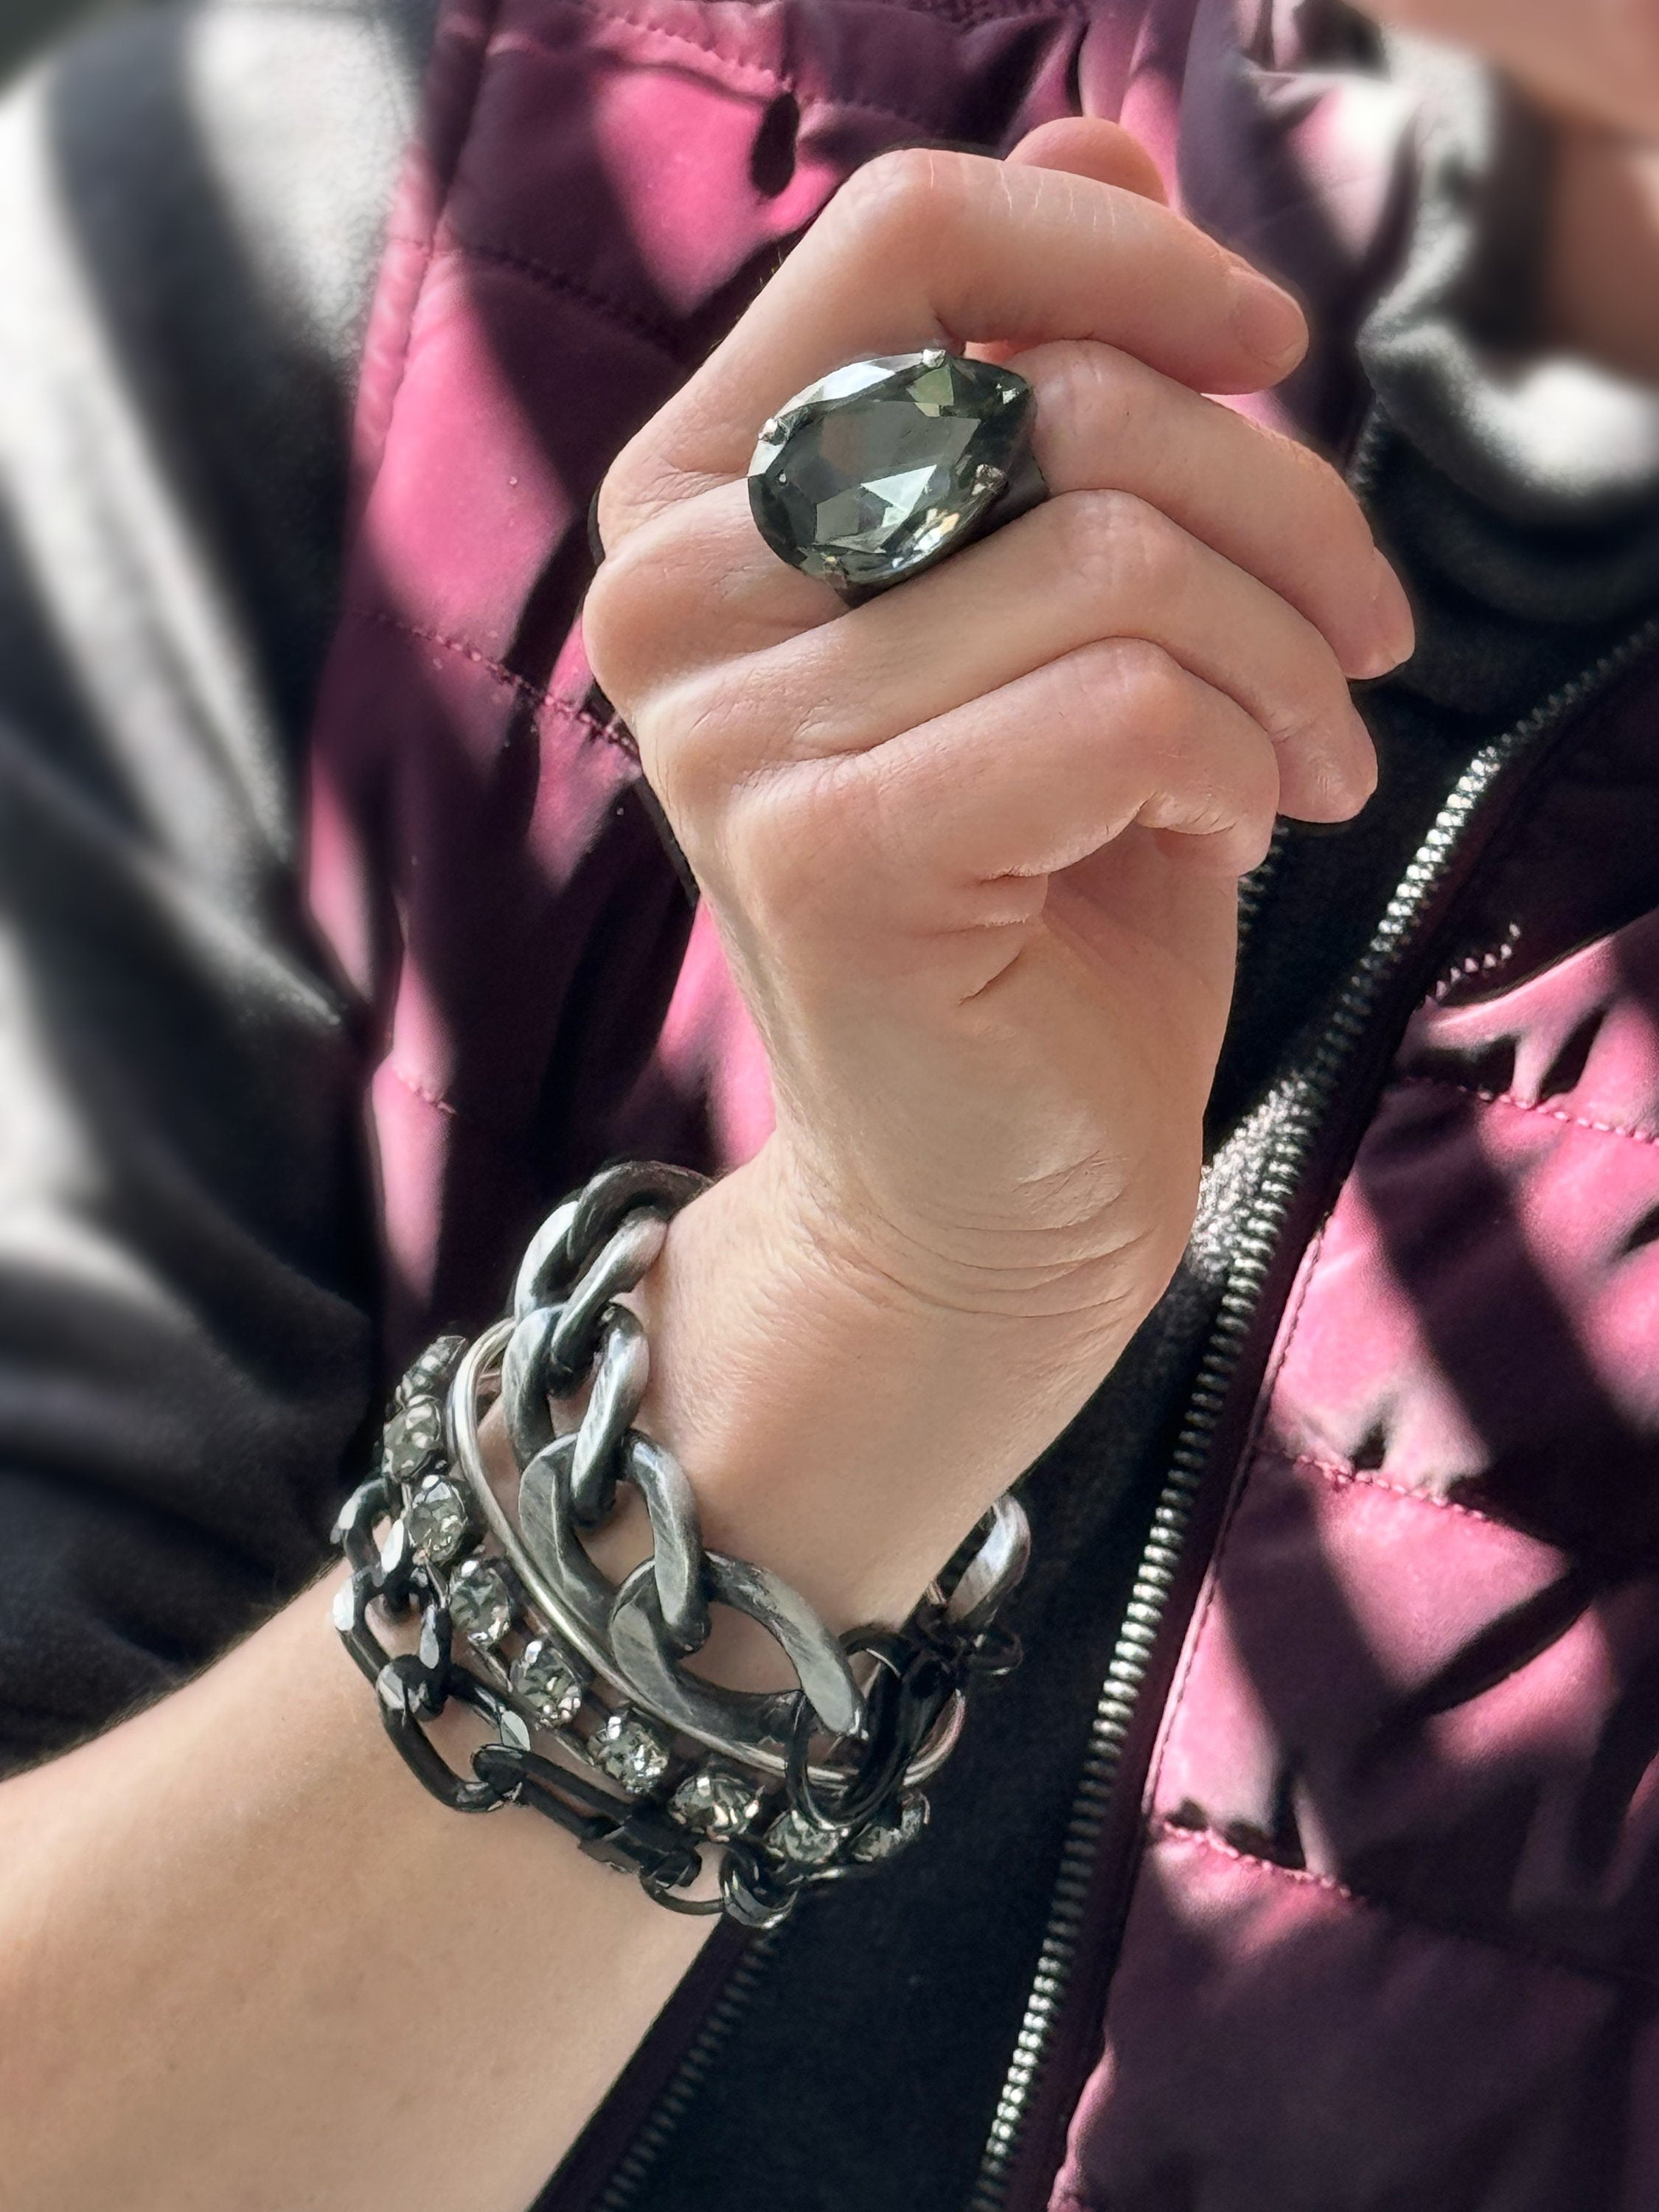 ICON - Thick Chunky Chain Bracelet . Distressed Black Silver Chain Bracelet for Men and Women - Unisex Silver Chain Bracelet, Unisex Jewelry